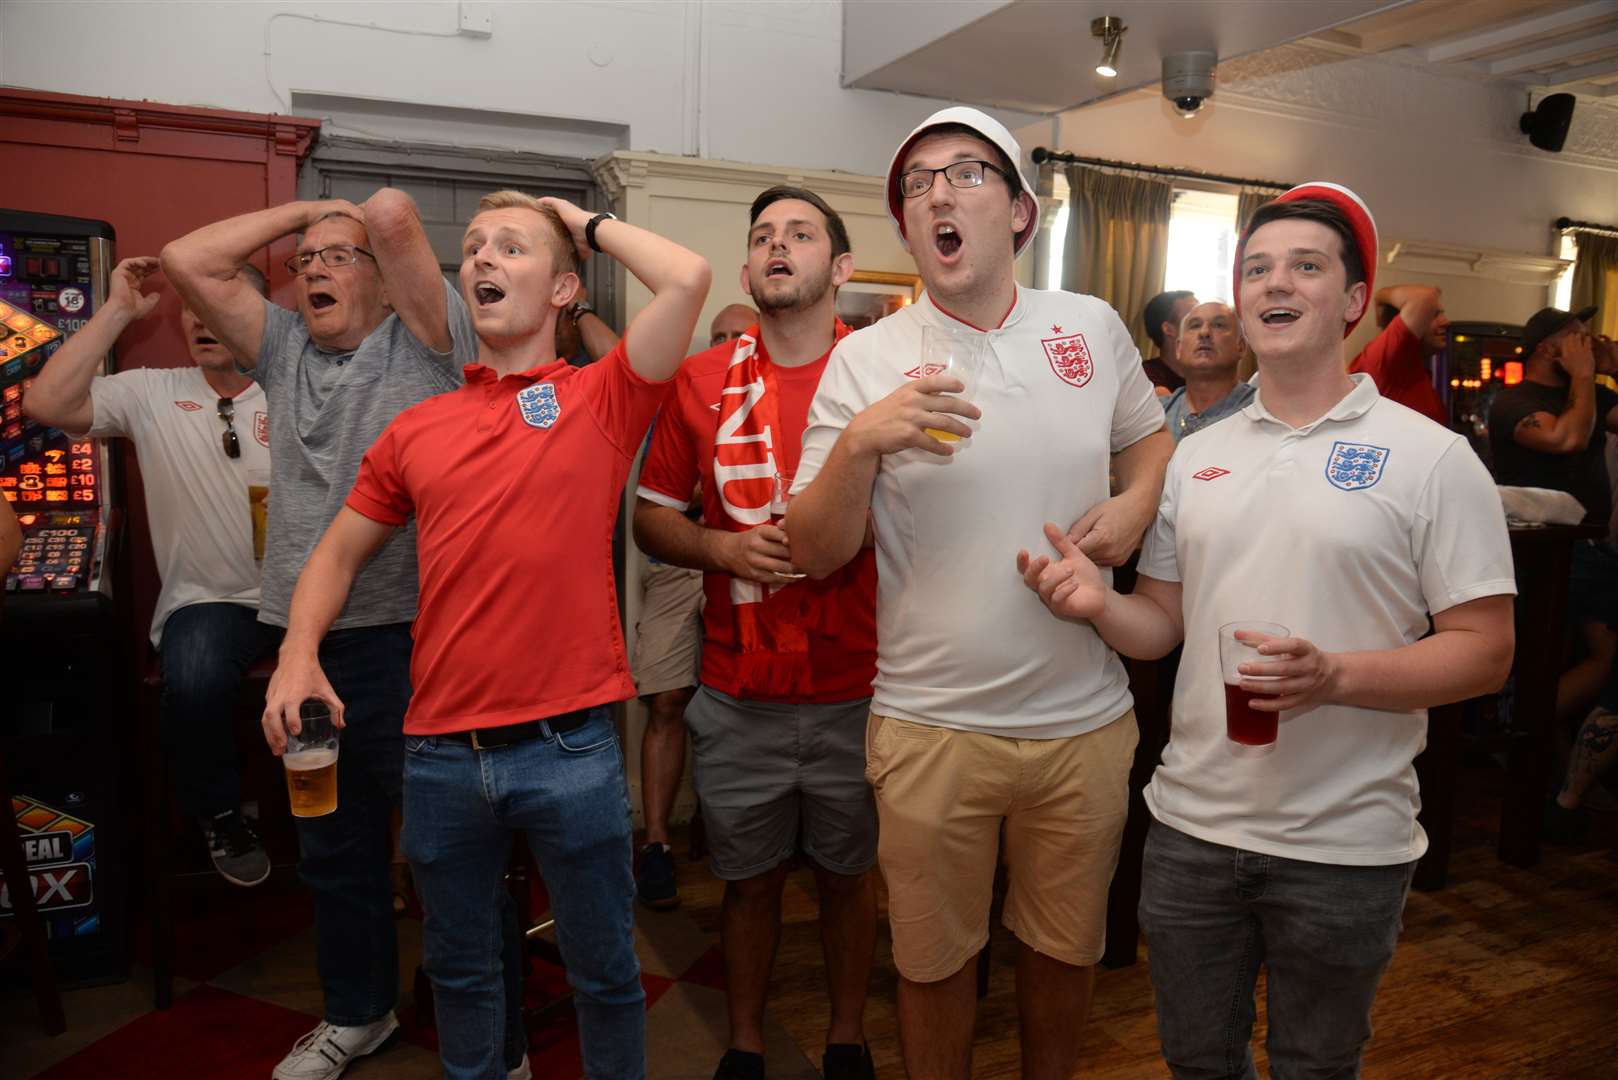 England unexpectedly reached the semi-finals of the 2018 World Cup; these fans are enjoying the game - so far - against Croatia at The Cricketers in Gillingham